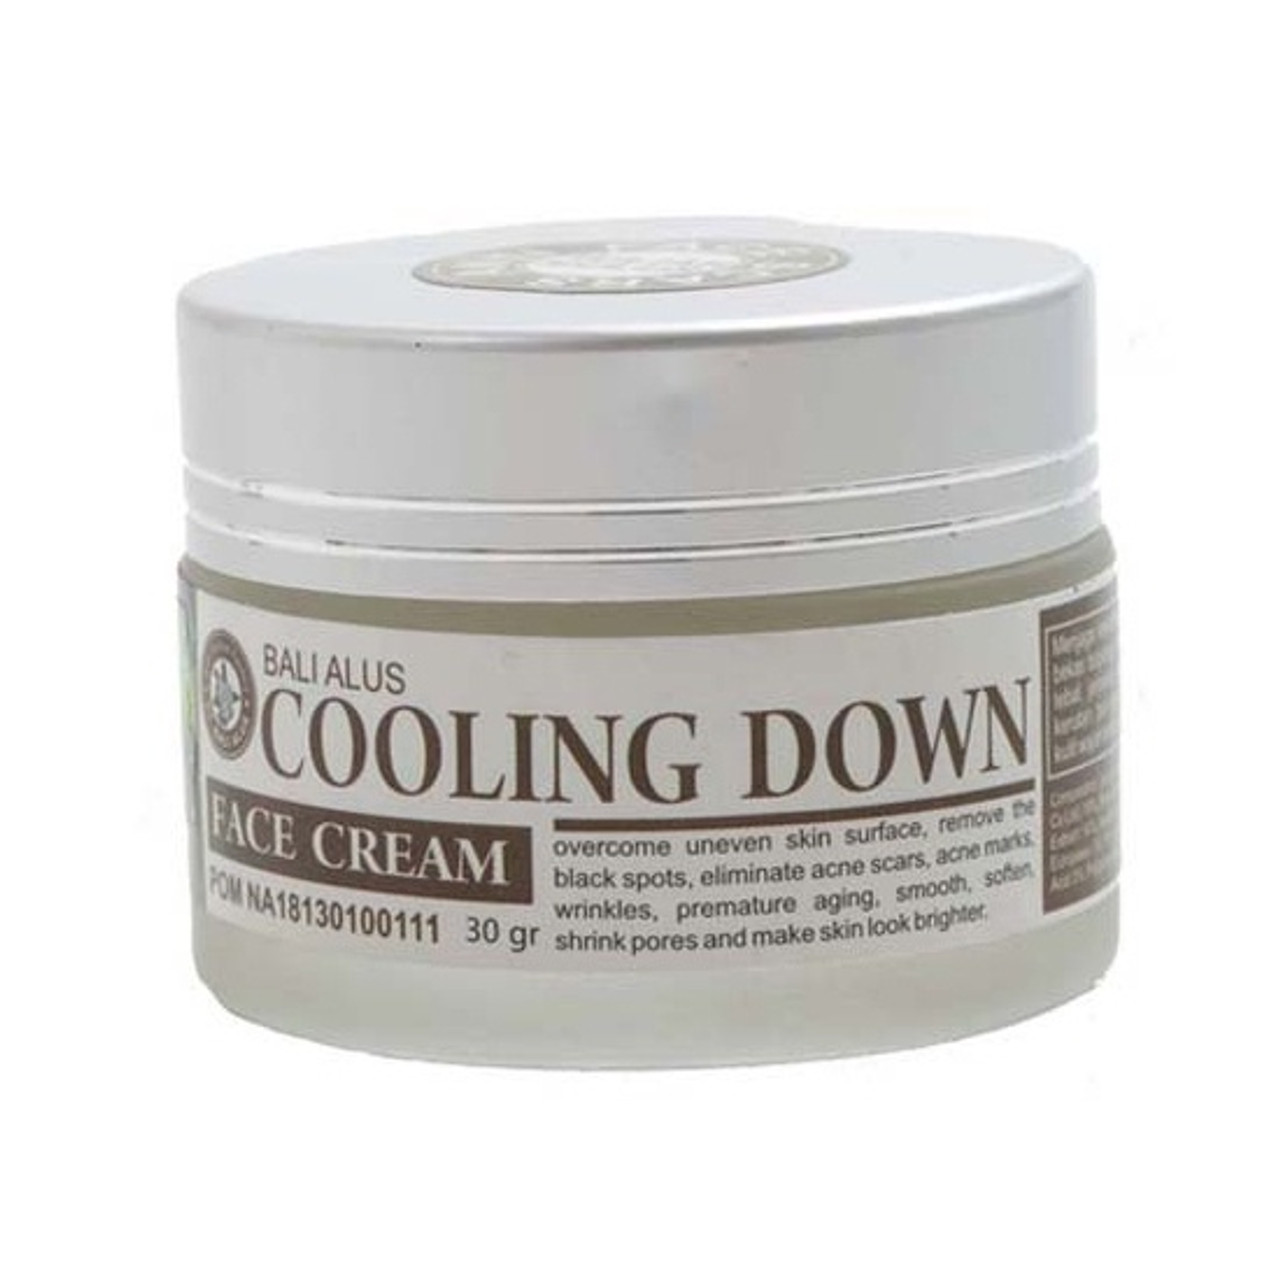 Bali Alus Cooling Down Face Cream, 30gr